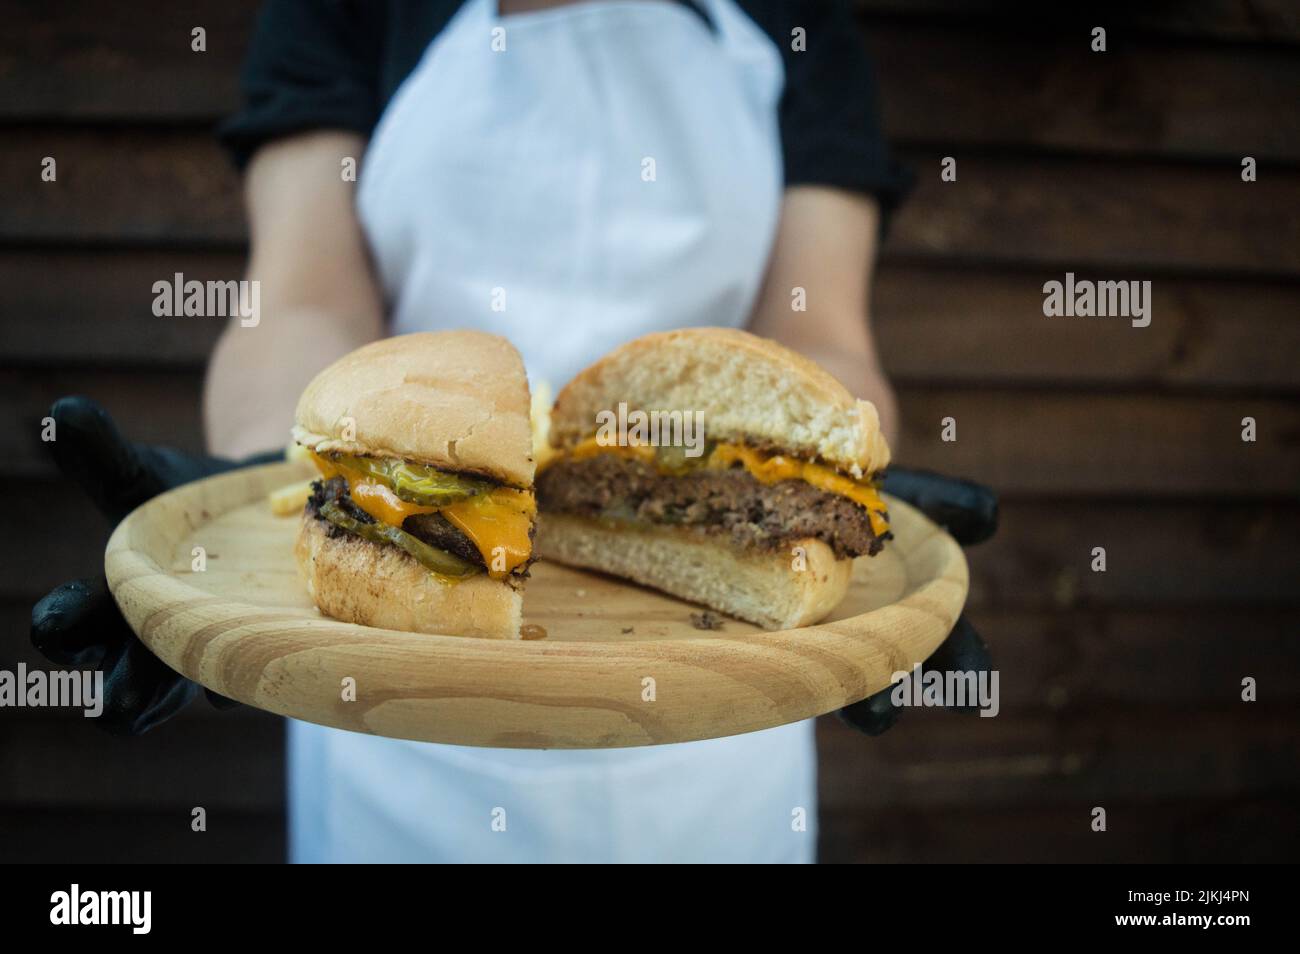 A close-up shot of a chef holding a burger cut in half on a wooden plate. Stock Photo